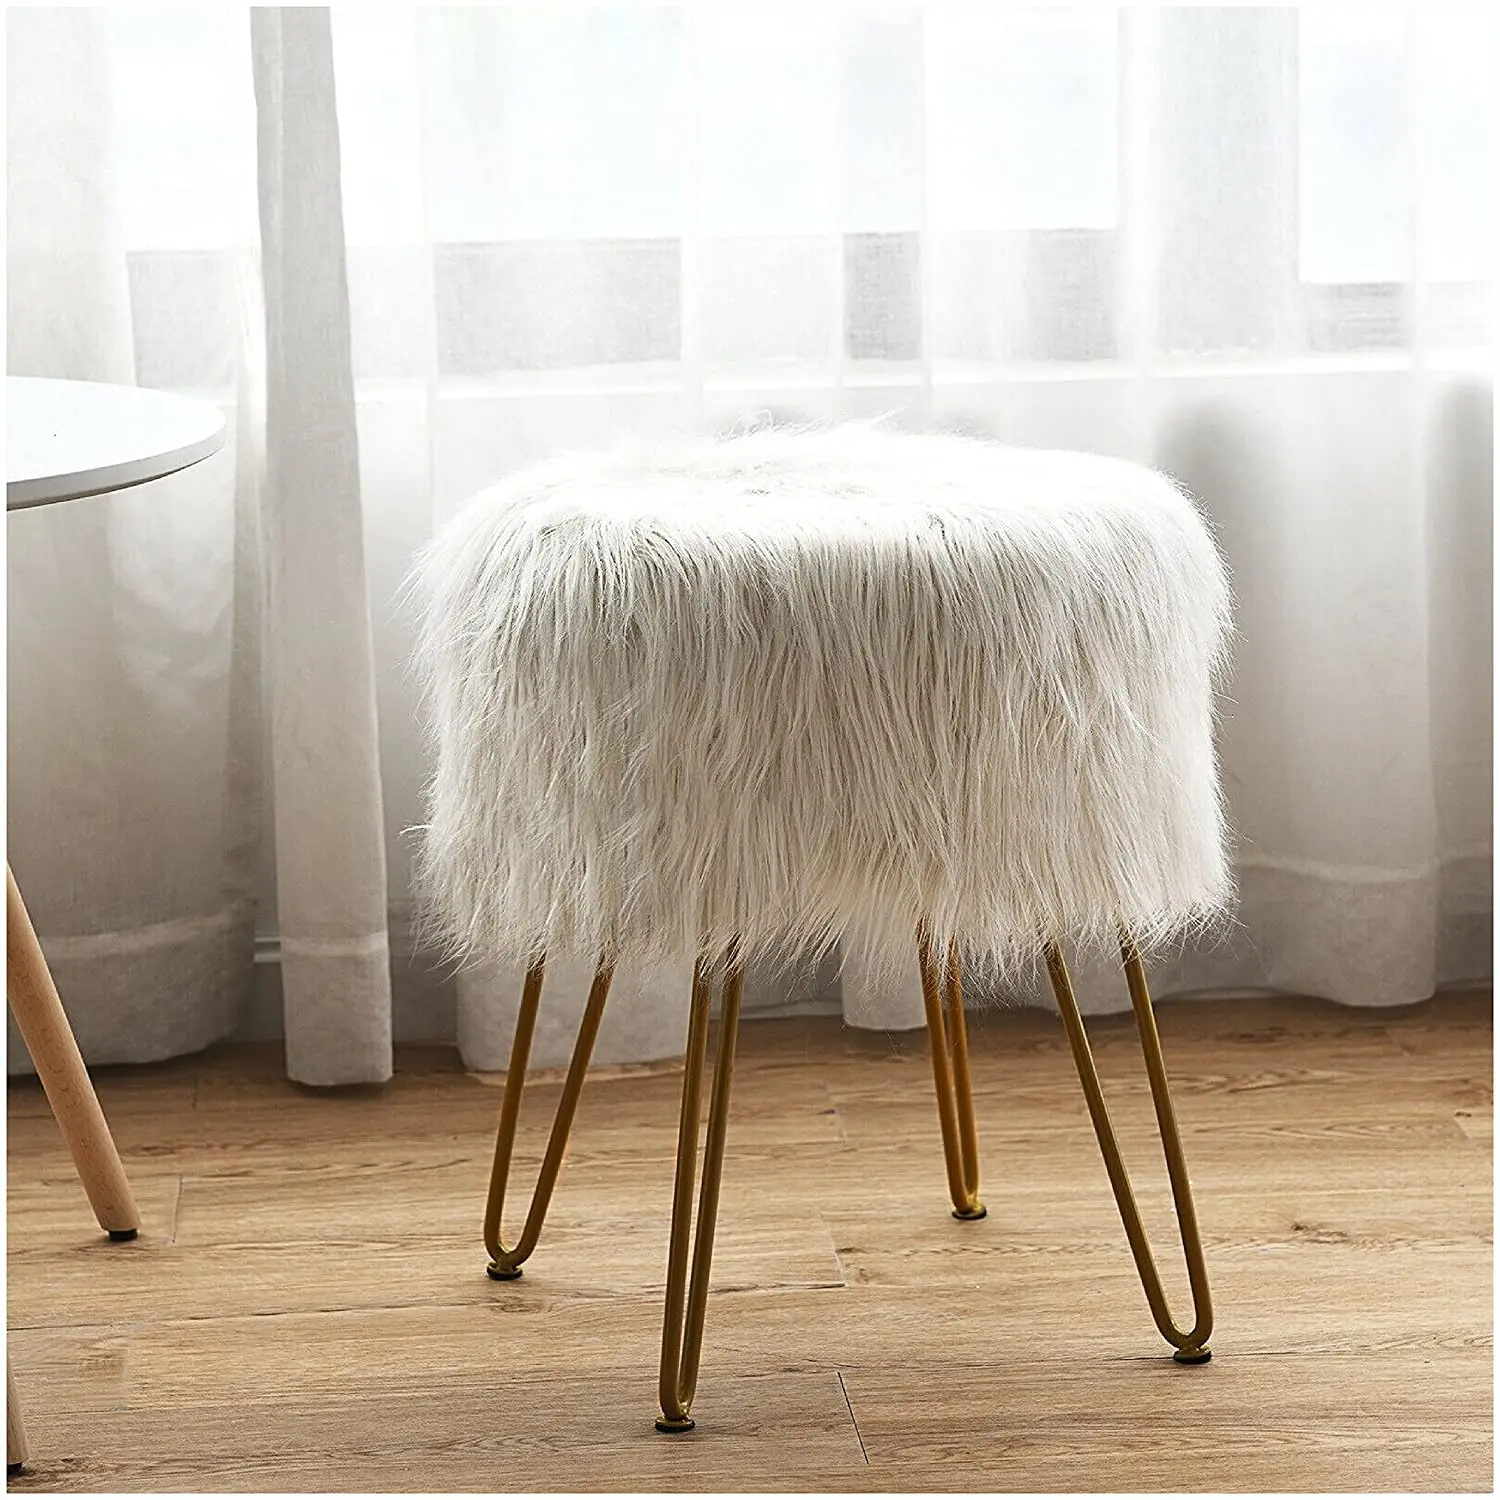 Details about   Costway Faux Fur Vanity Chair Makeup Stool Furry Padded Seat Round Ottoman White 